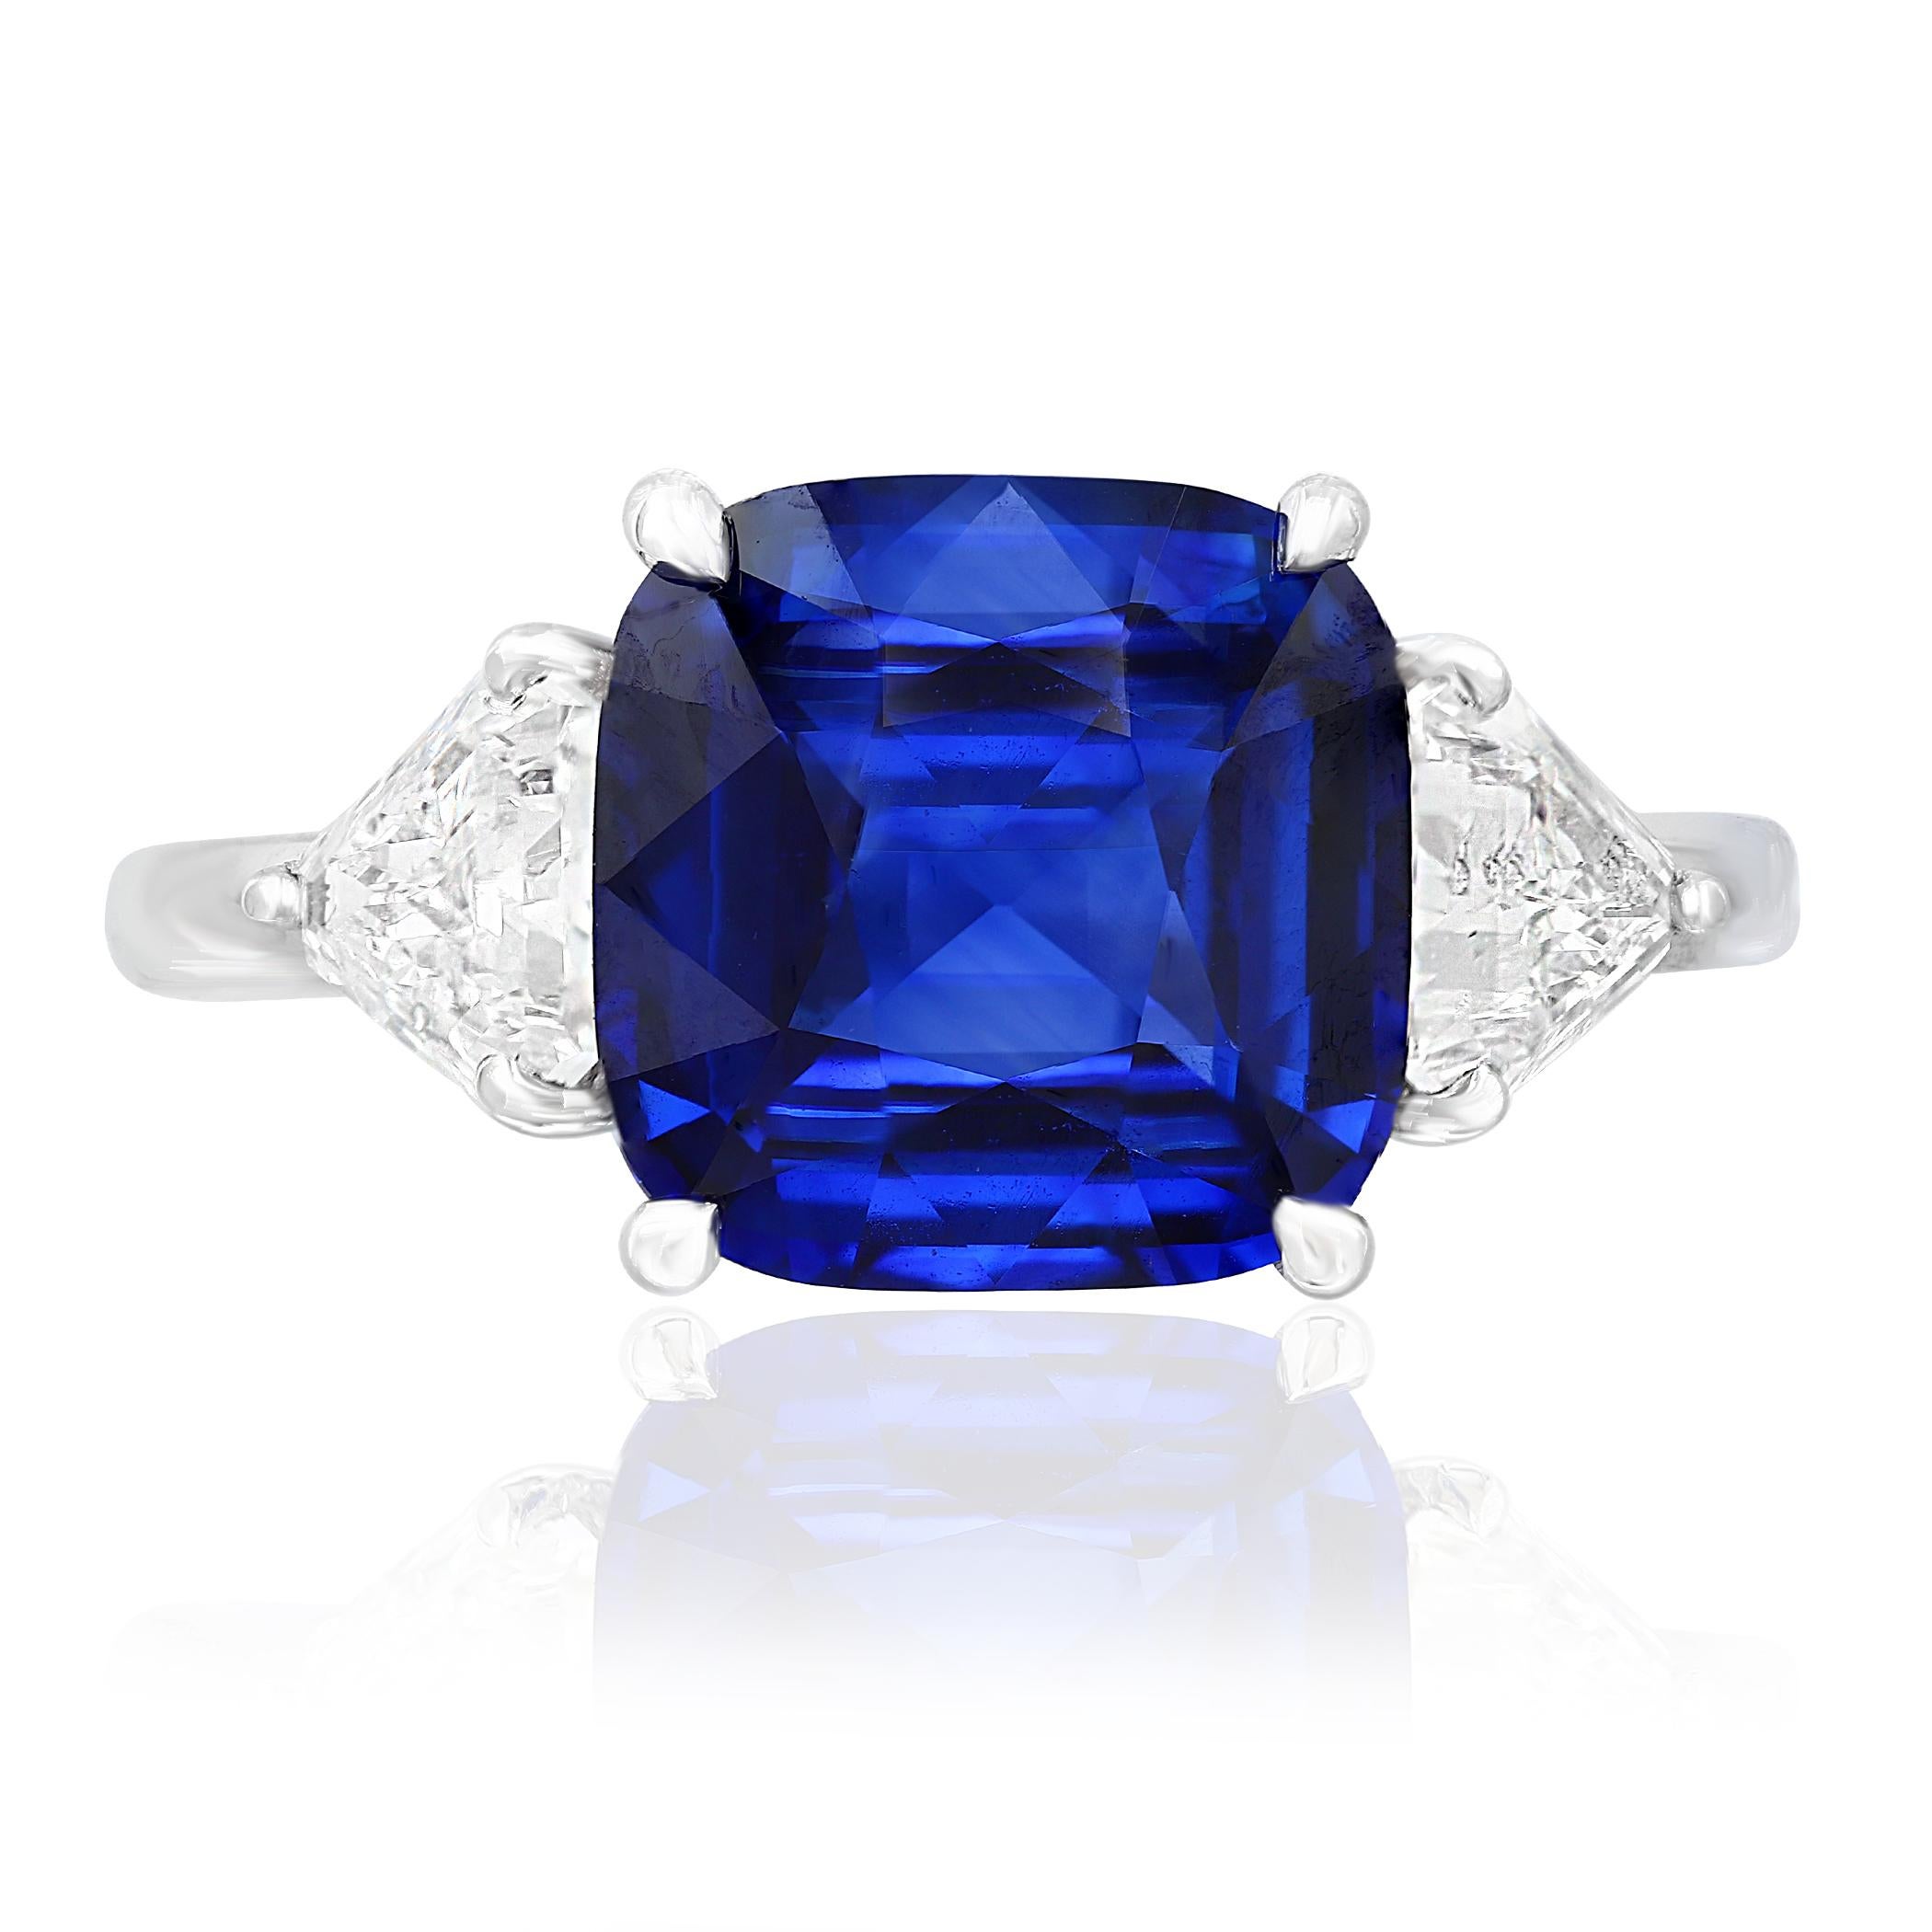 Showcases a Cushion cut, Vibrant color Blue Sapphire weighing 4.09 carats, flanked by two pointed trillion cut diamonds weighing 0.96 carats total. Elegantly set in a polished platinum composition.